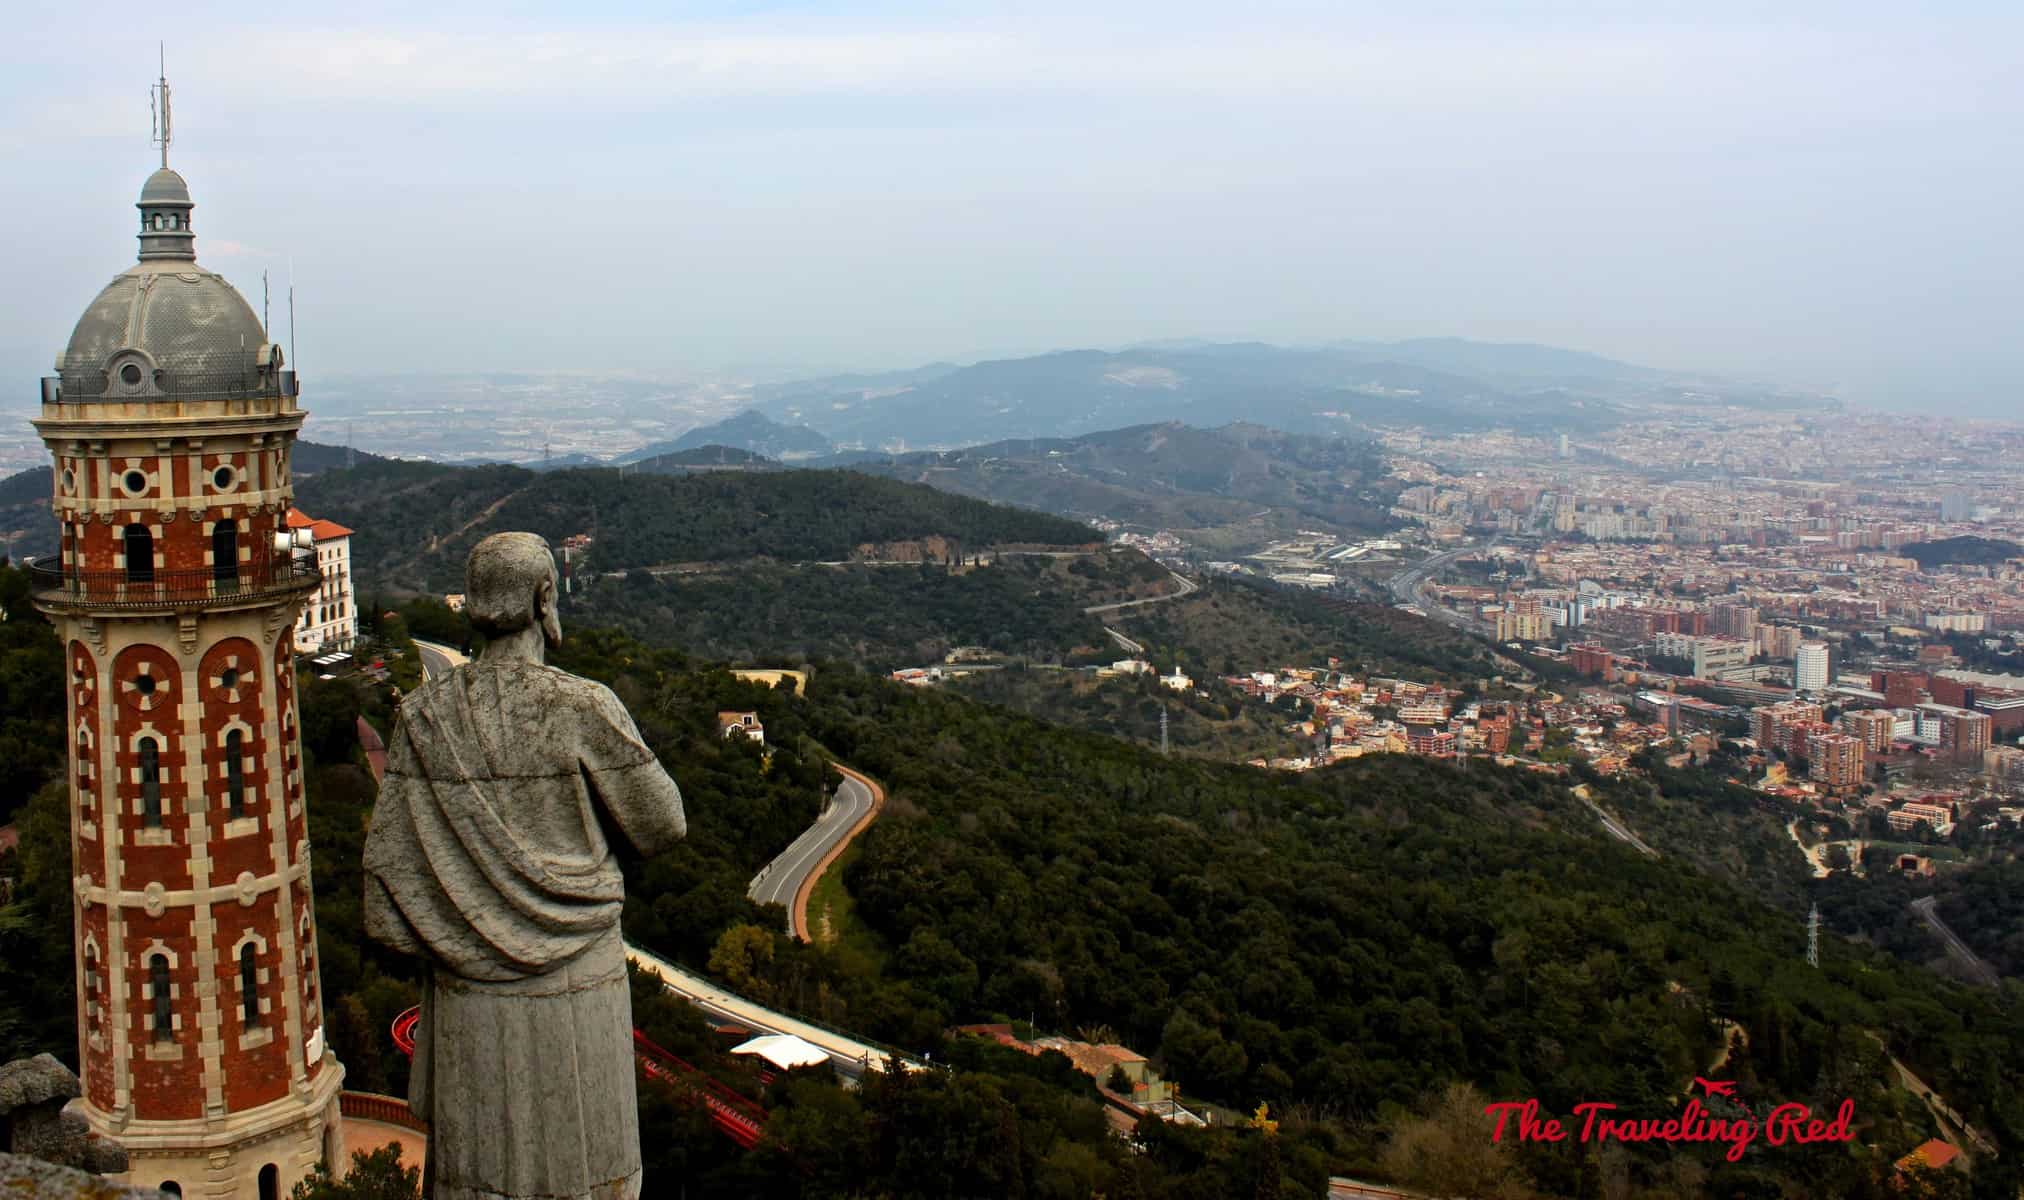 The view of Barcelona, Spain from the Sagrat Cor (the church at the summit) in Tibidabo. Tibidabo is a mountain with an amusement park and church. It is the highest point in the city with incredible sweeping views of the city.